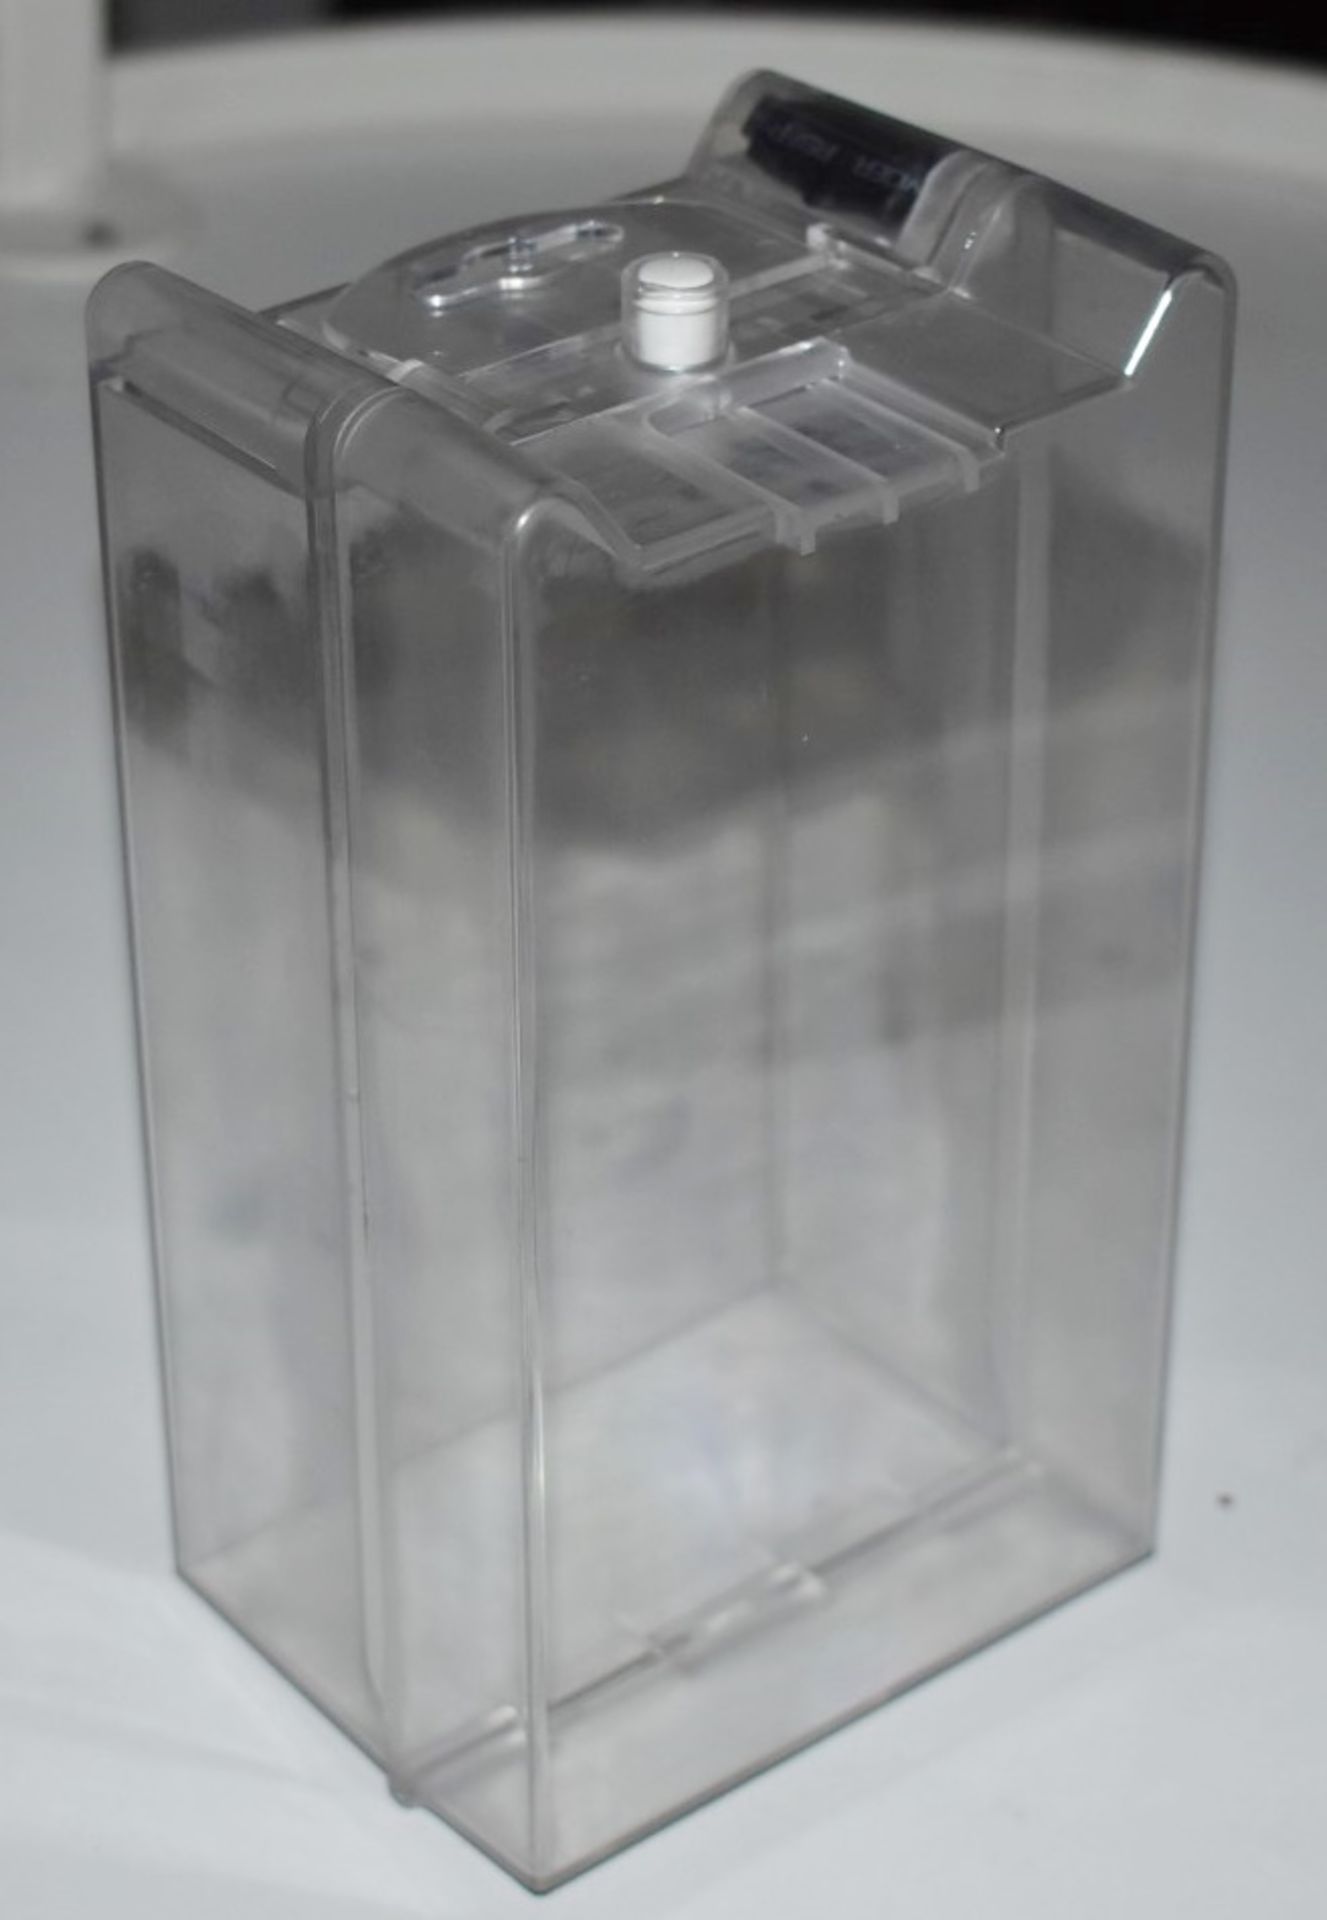 40 x Catalyst Clear Acrylic Retail Security Safer Cases With RF Tags and Hanging Tags - Brand New - Image 7 of 9